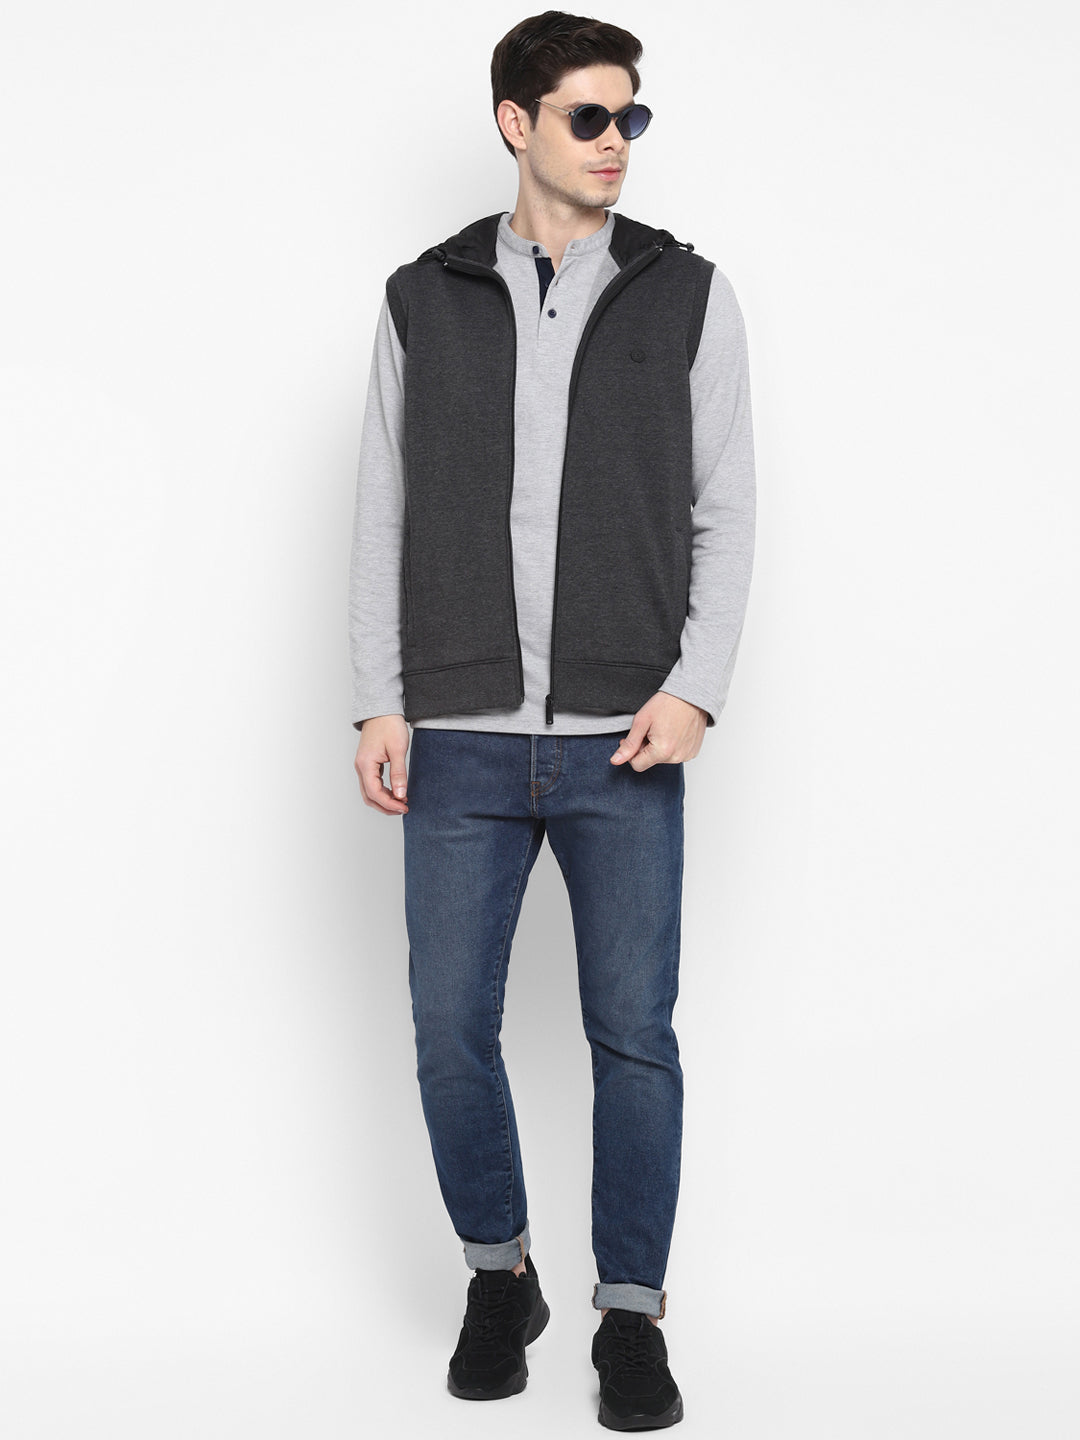 Solid Grey High Neck Sleeveless Sweater for Men